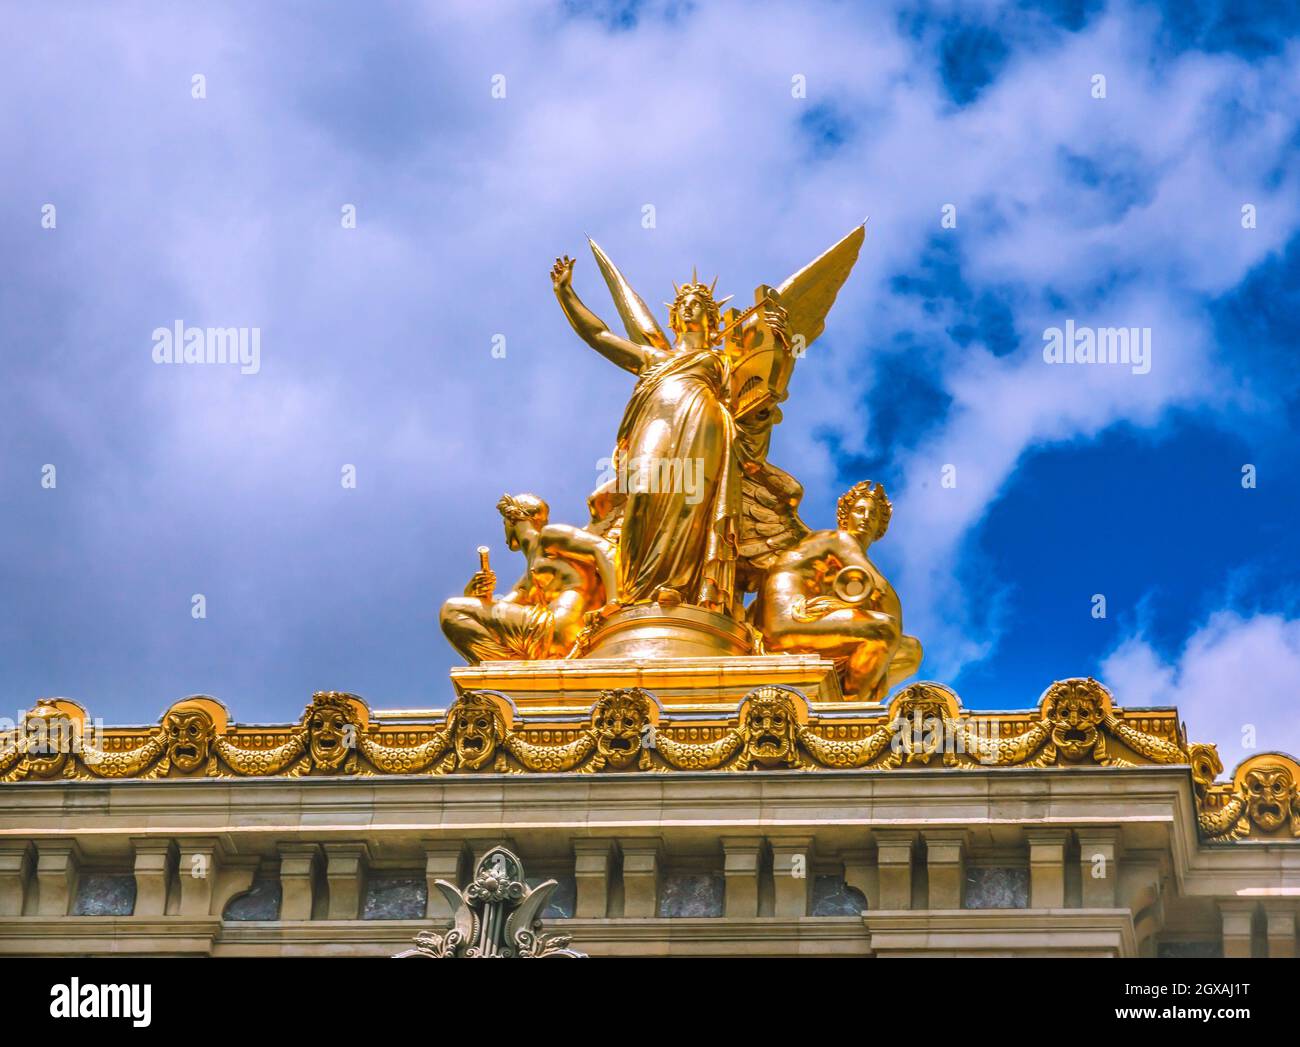 Golden Harmony Statue Opera National de Paris Palais Gannier Paris France.  Opera opened in 1875. Statue by Charles Gumery (1827-1871 Stock Photo -  Alamy